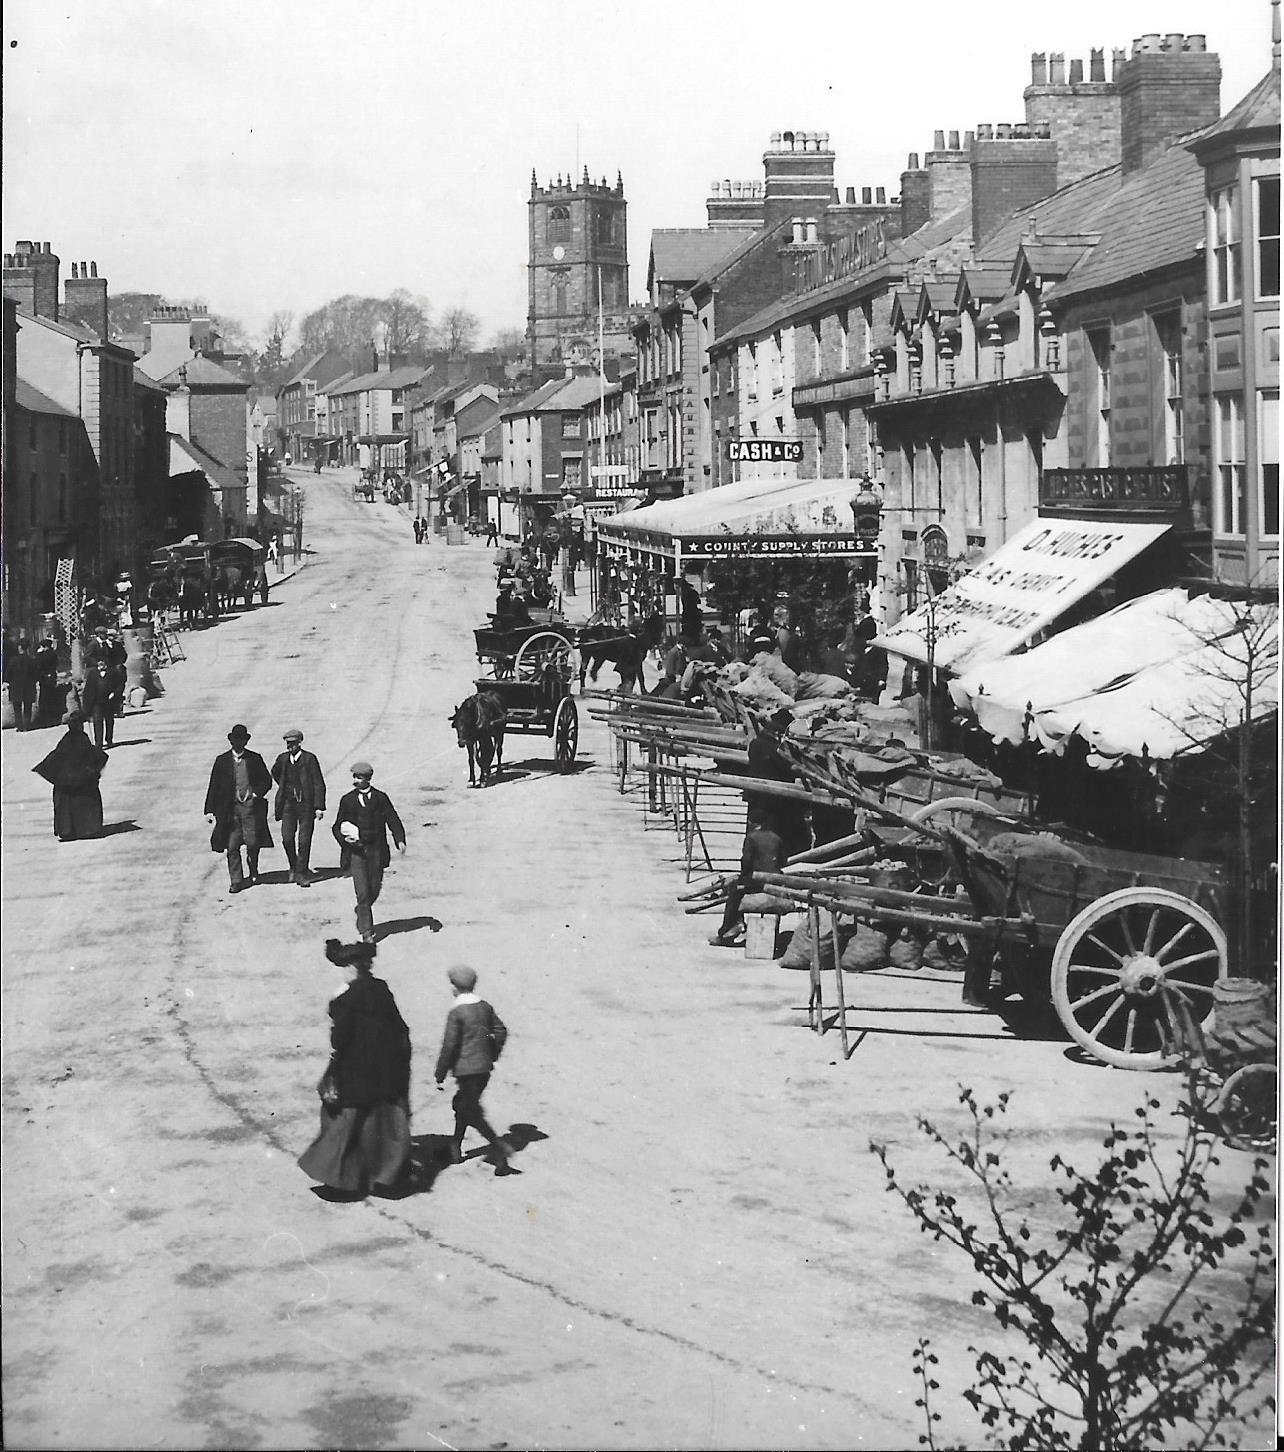 Mold market, a photo from the Historic Mold exhibition, courtesy of Flintshire Record Office.